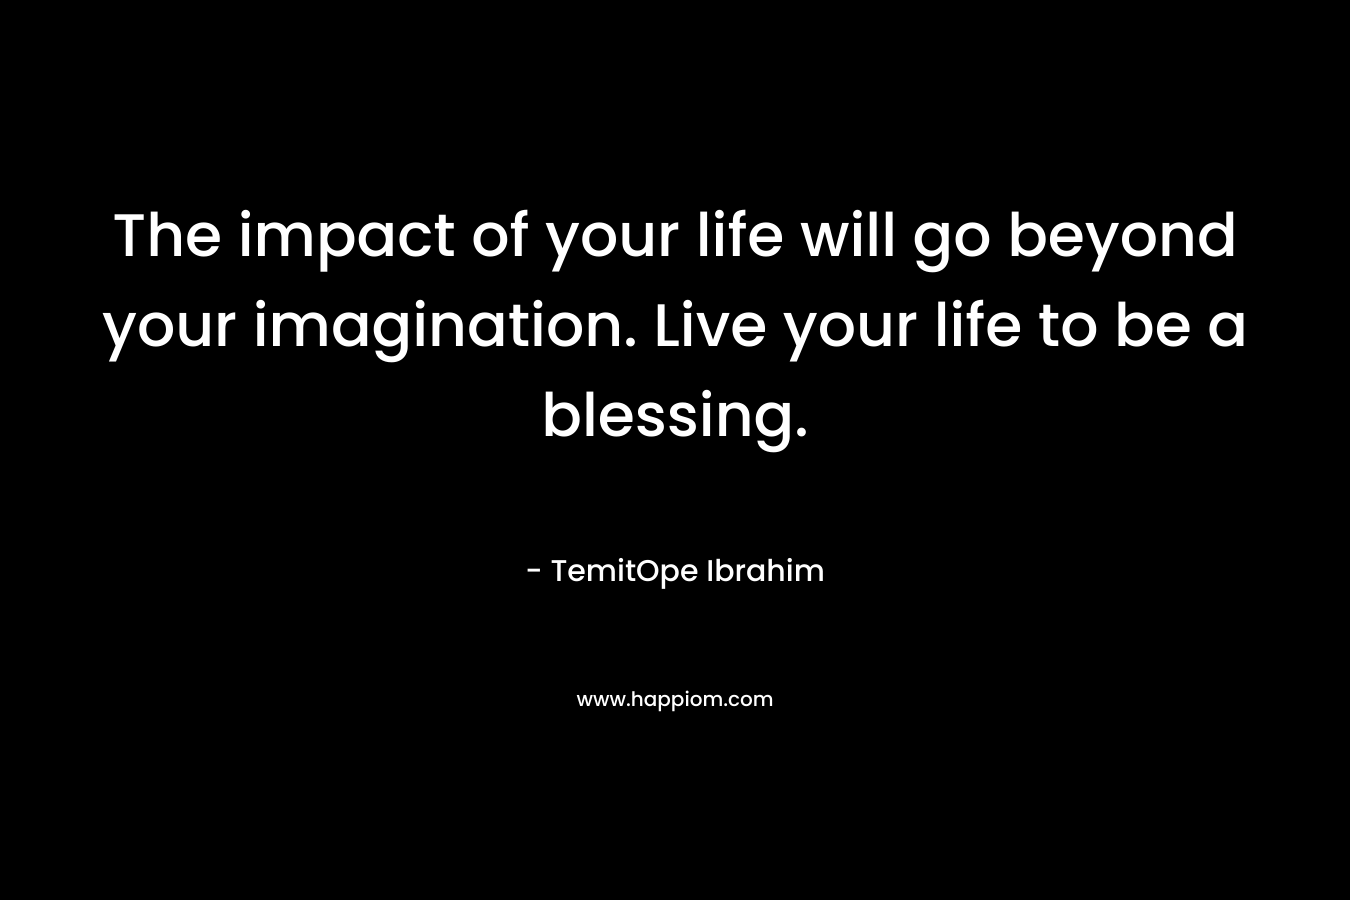 The impact of your life will go beyond your imagination. Live your life to be a blessing.